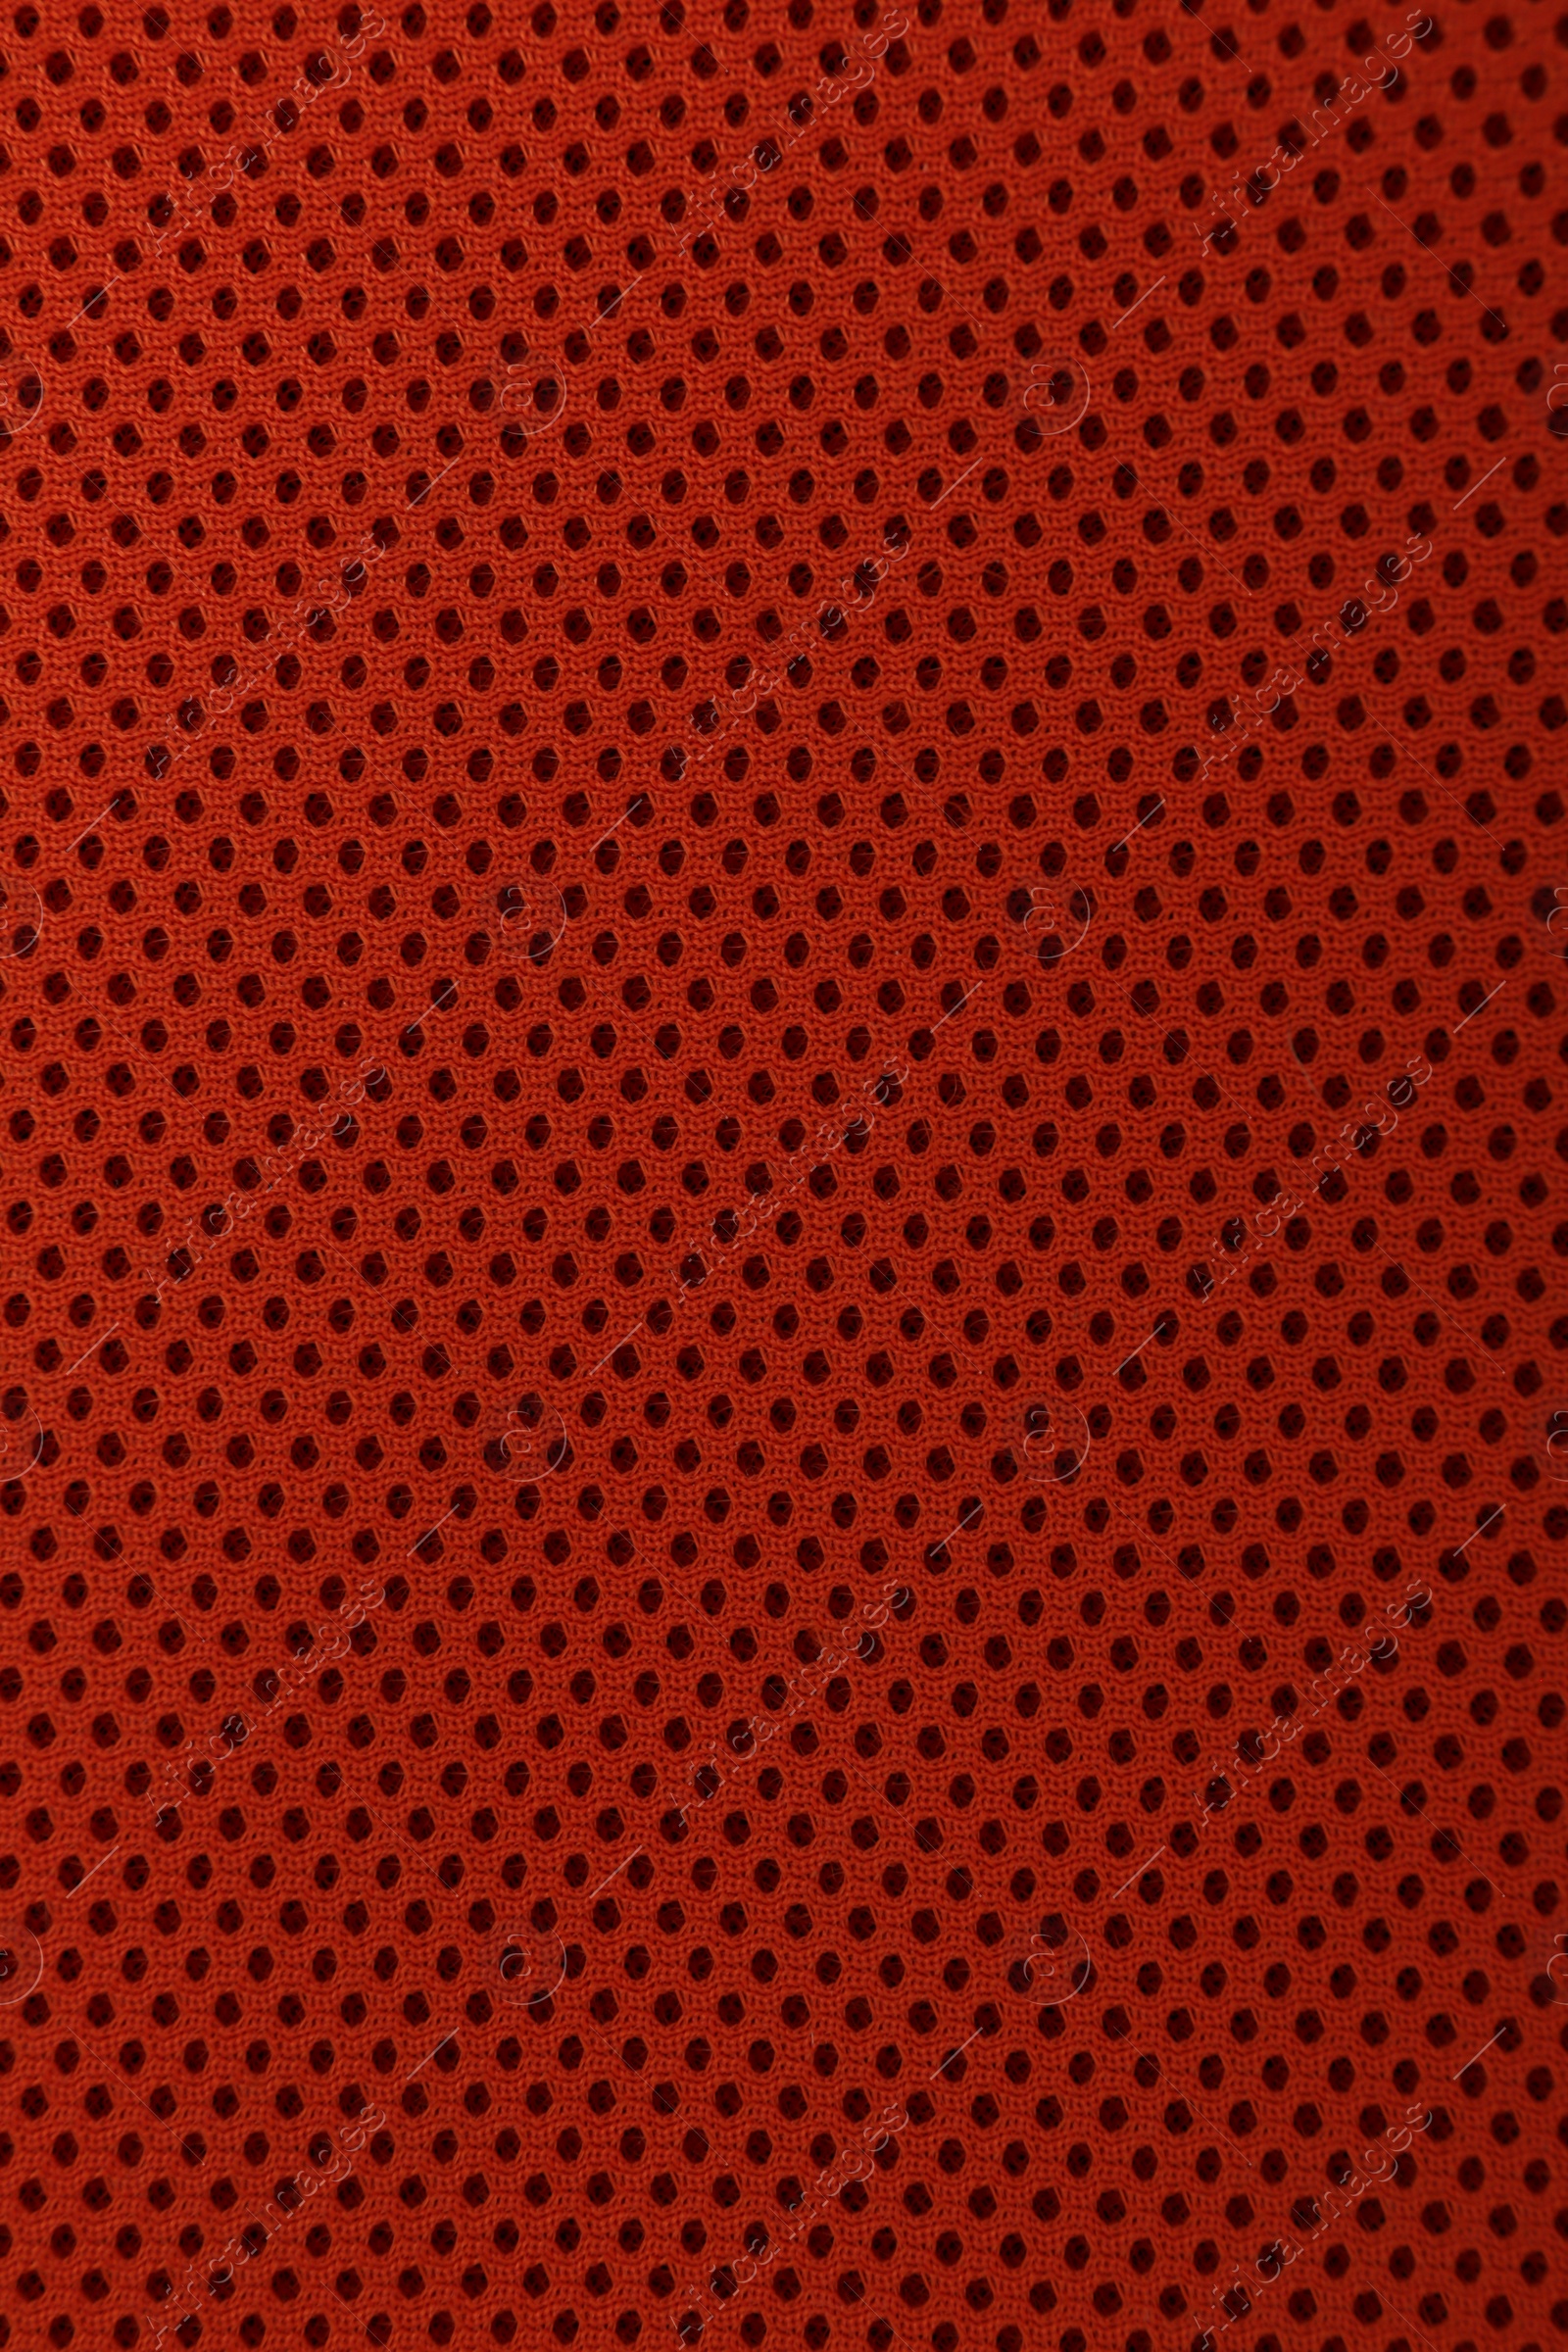 Photo of Texture of orange fabric as background, top view